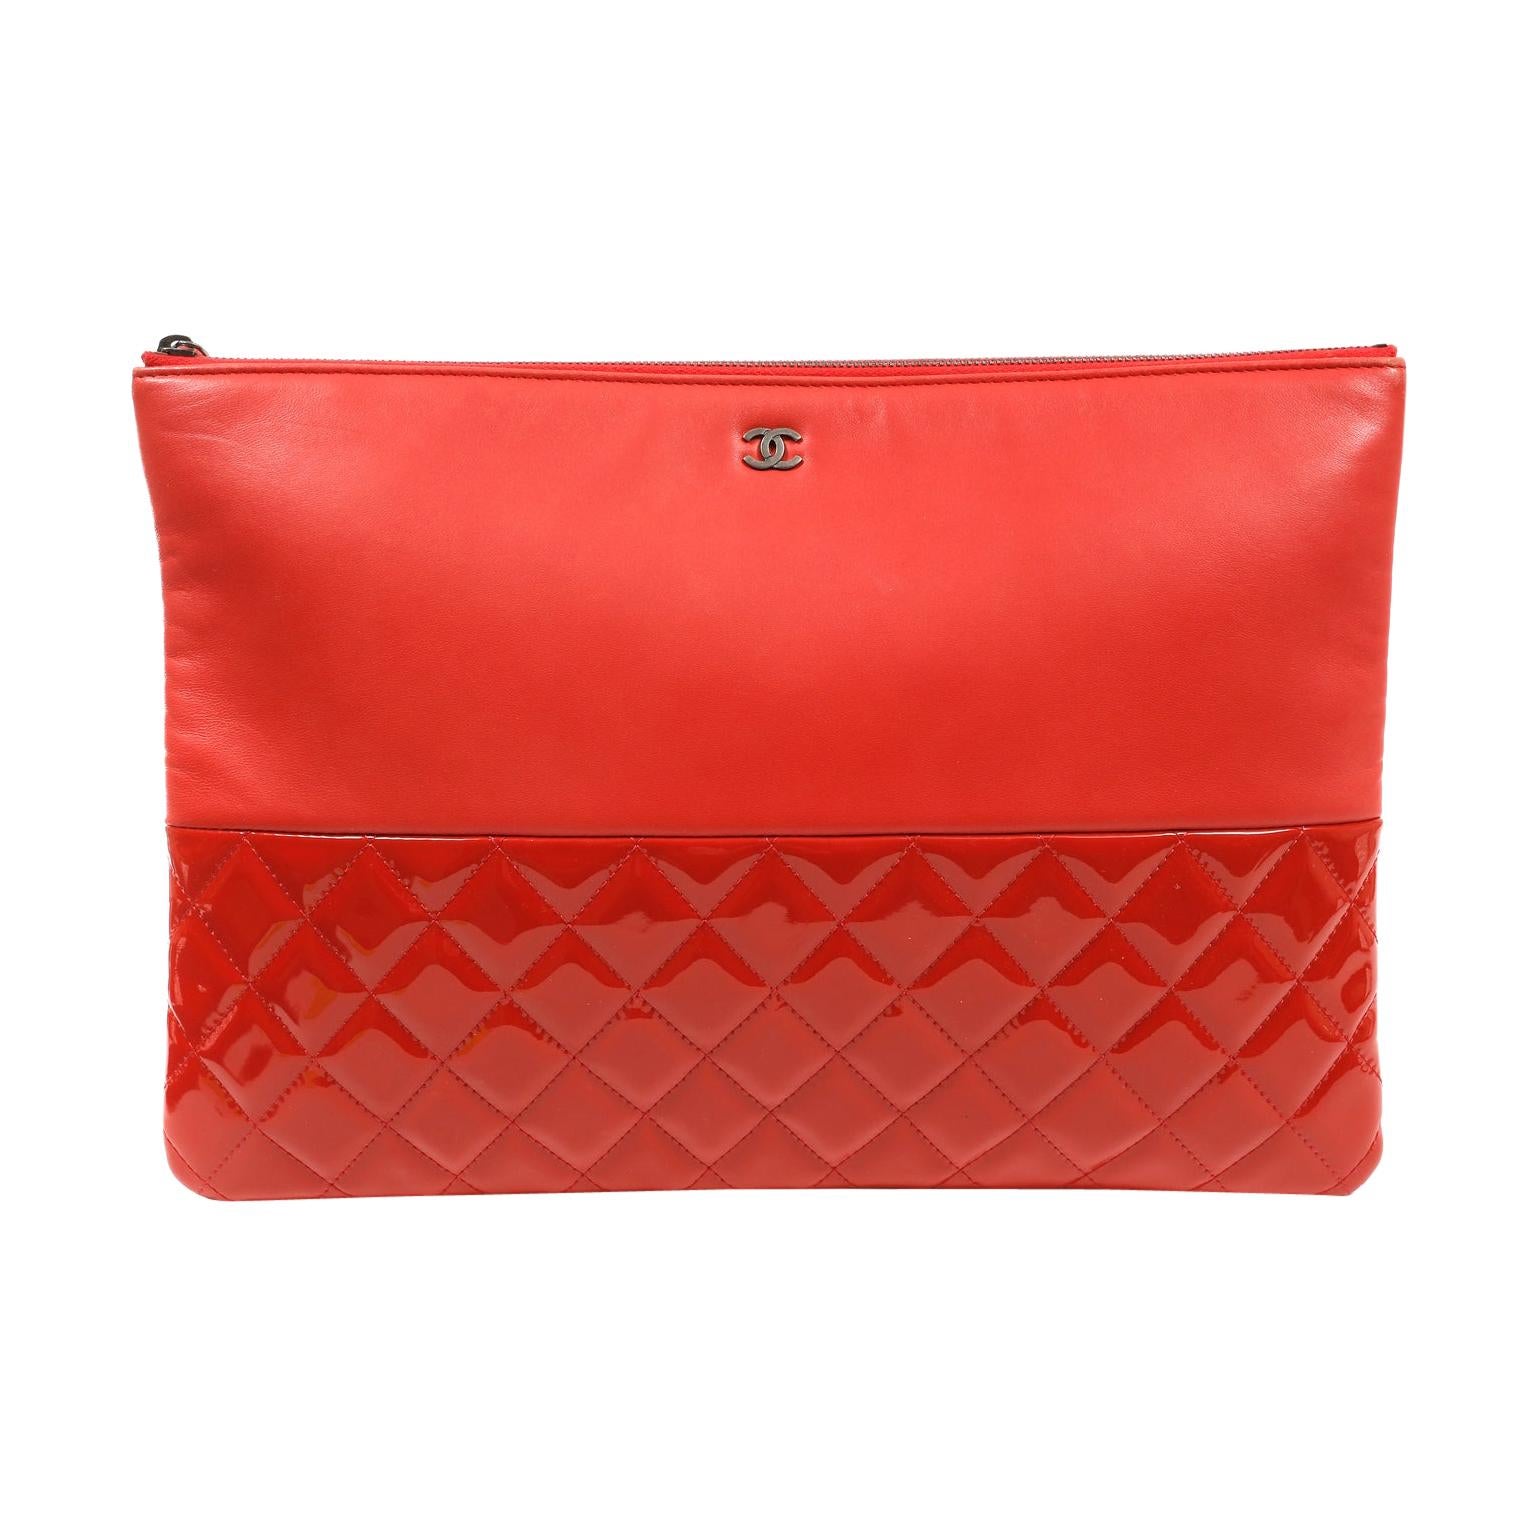 Chanel Red Lambskin and Patent Leather Clutch